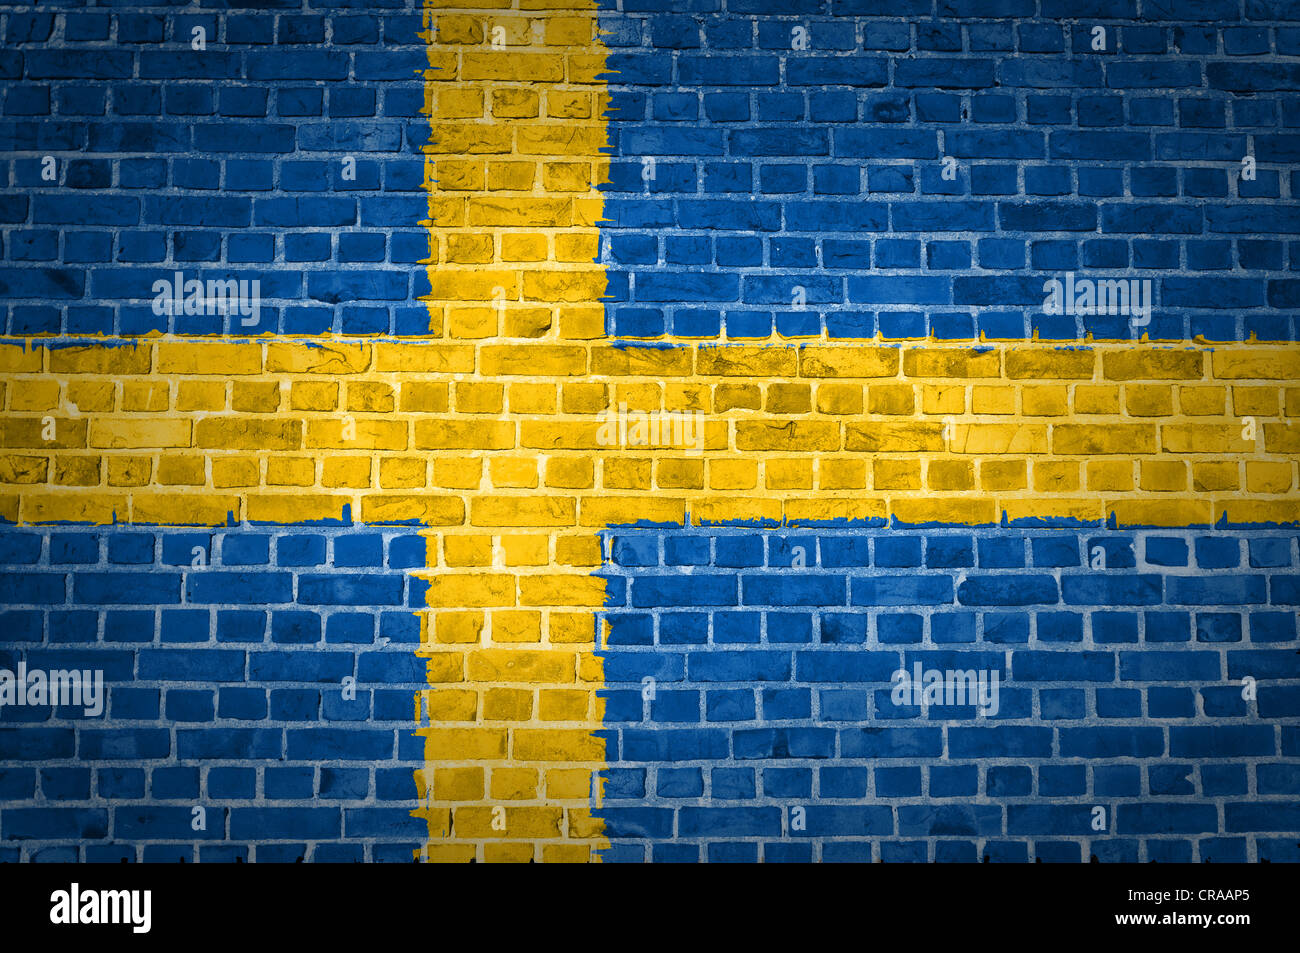 An image of the Sweden flag painted on a brick wall in an urban location Stock Photo